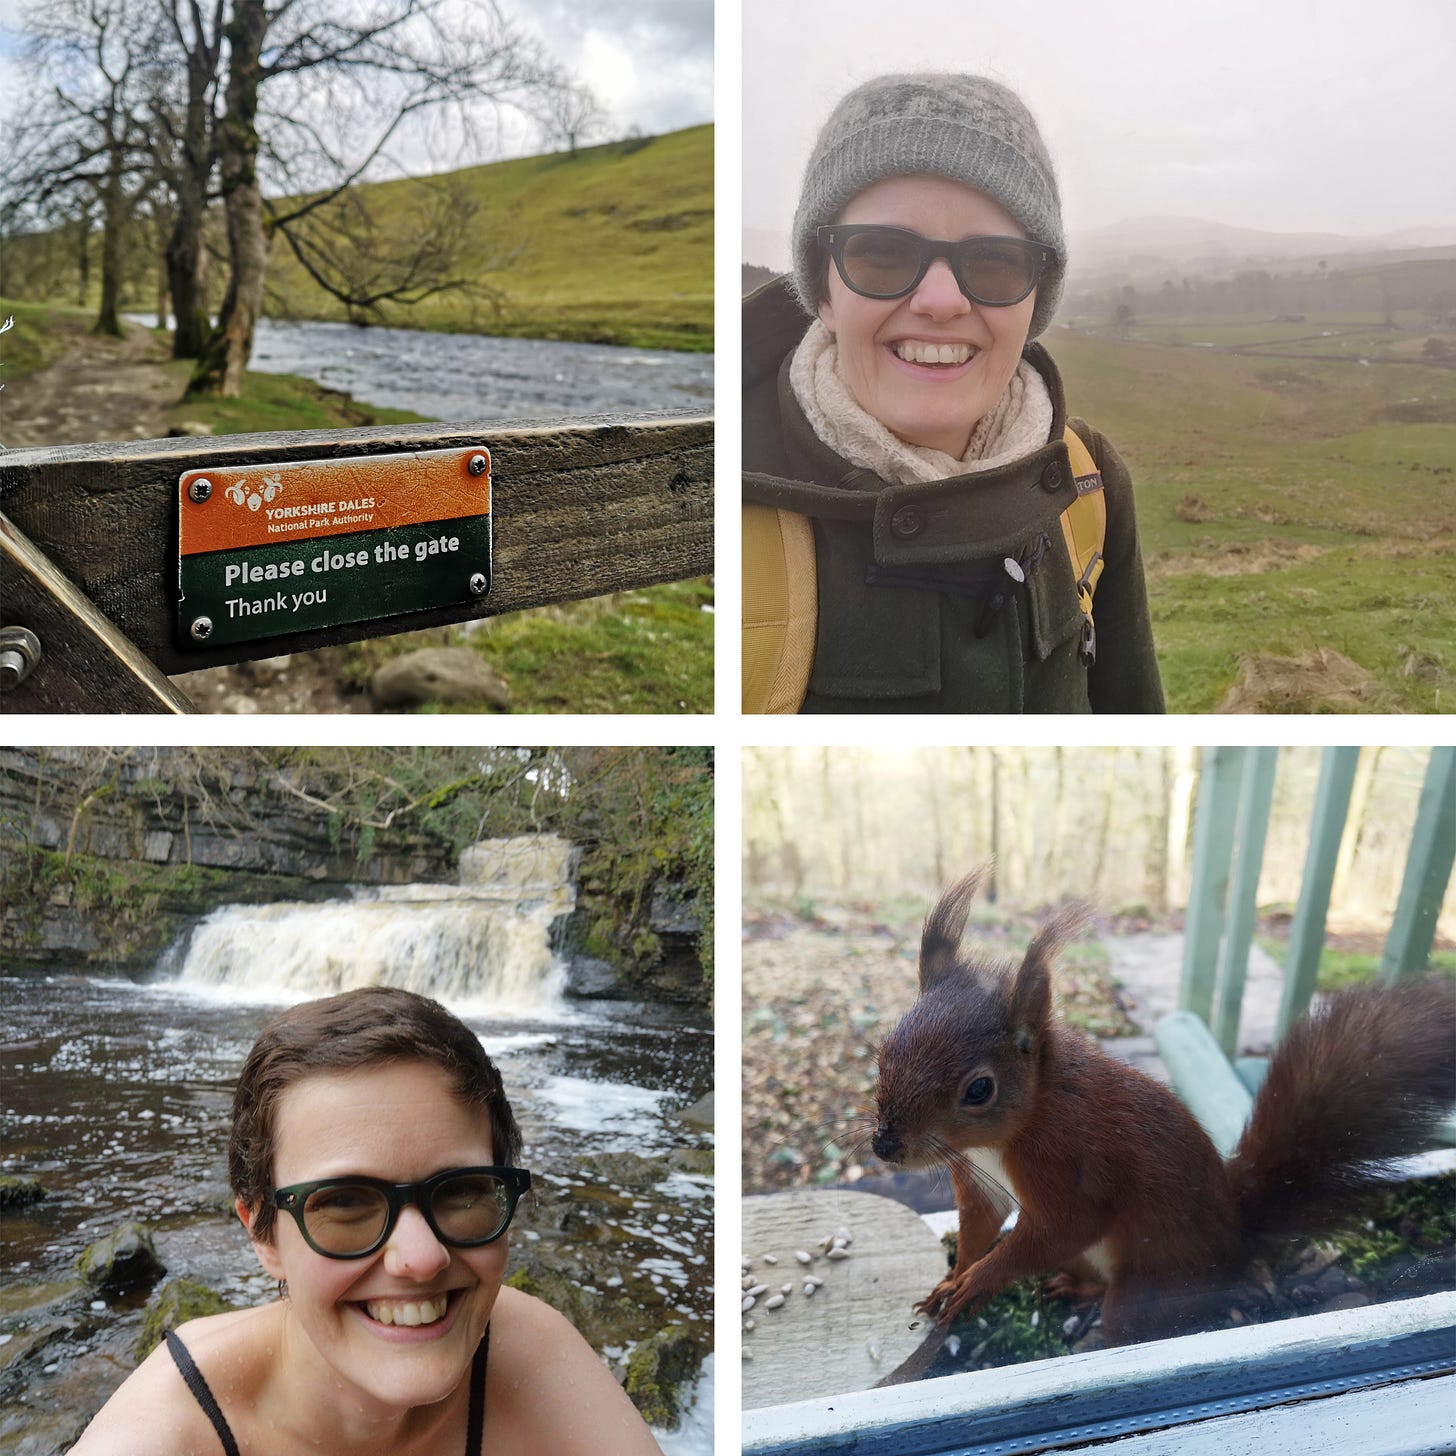 A quartet of photos. Clockwise from top left: A close up of a wooden gate, with an orange and black sign that reads "Yorkshire Dales National Park Authority" with a ram's head logo, and then, "Please close the gate, thank you." Beyond the gate, a footpath follows the bank of a river, with a green sloping hill in the background. 2) A selfie. Katie looks bewilderedly at the camera, wearing sunglasses but also woolly hat, coat and shawl, the sunny weather that started the walk has suddenly turned to low cloud, mist and then hail. In the background, a hazy landscape of green fields, trees and hills. 3) The most adorable red squirrel, with the most fantastic tufty ears, stands by a feeder on the windowsill. There are some sunflower seeds sitting out on the wood to tempt them, but they seem just as curious about the human watching them from behind the glass. 4) Another selfie. Katie grins at the camera with the joy only a freezing cold spring dip can bring. In the background, a little waterfall and deep pool filled by the recent rain/hail (see above - this dip was part of the same walk!).